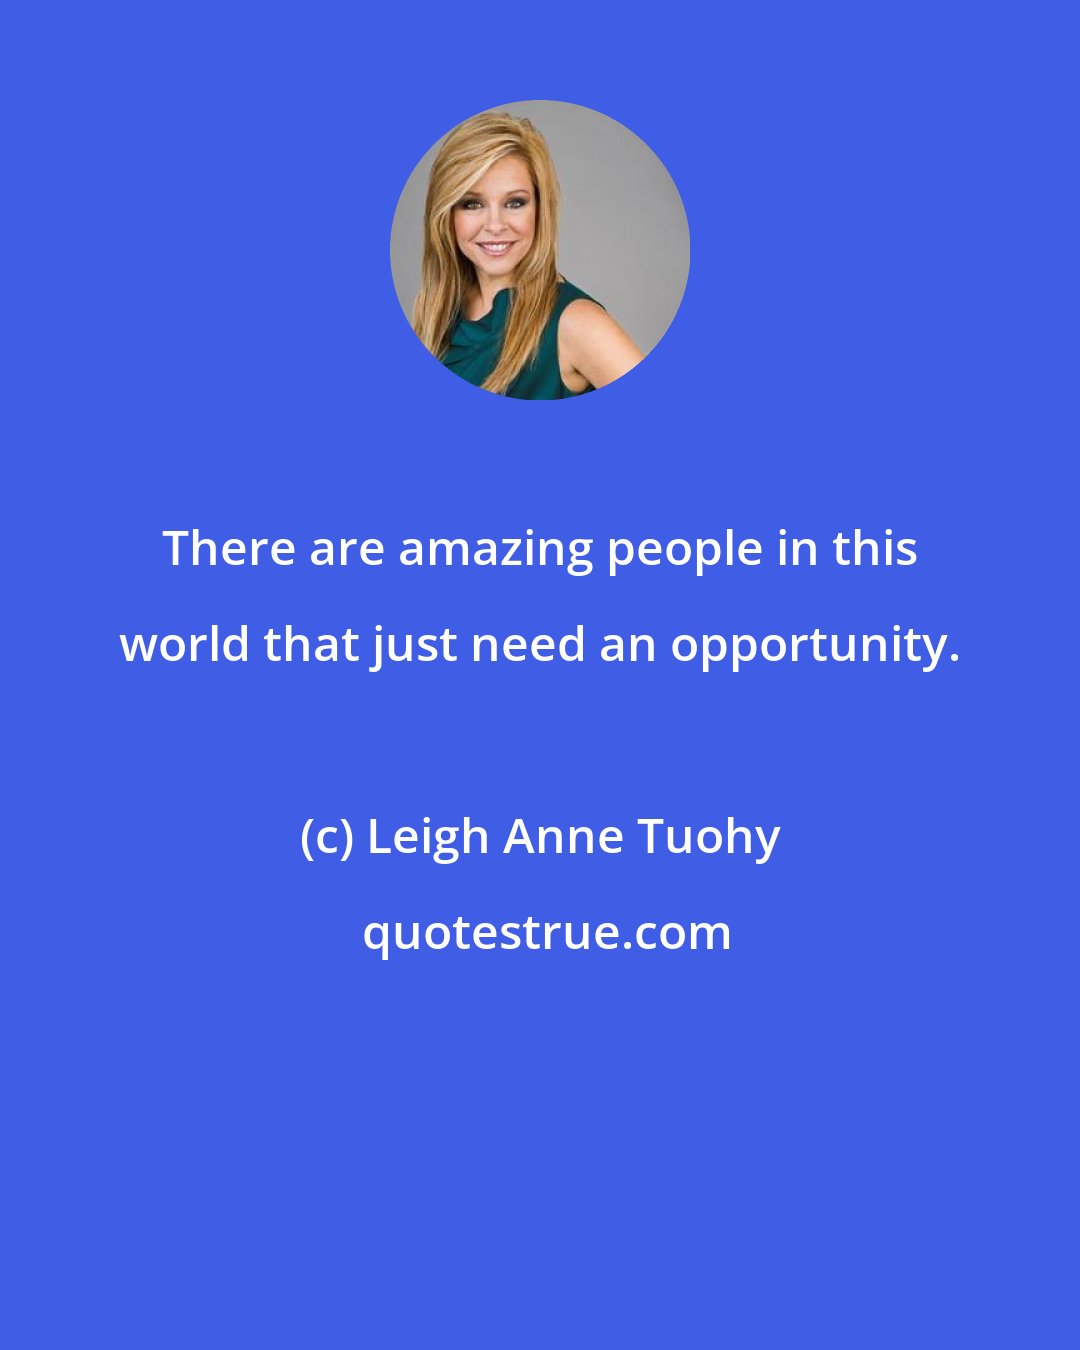 Leigh Anne Tuohy: There are amazing people in this world that just need an opportunity.